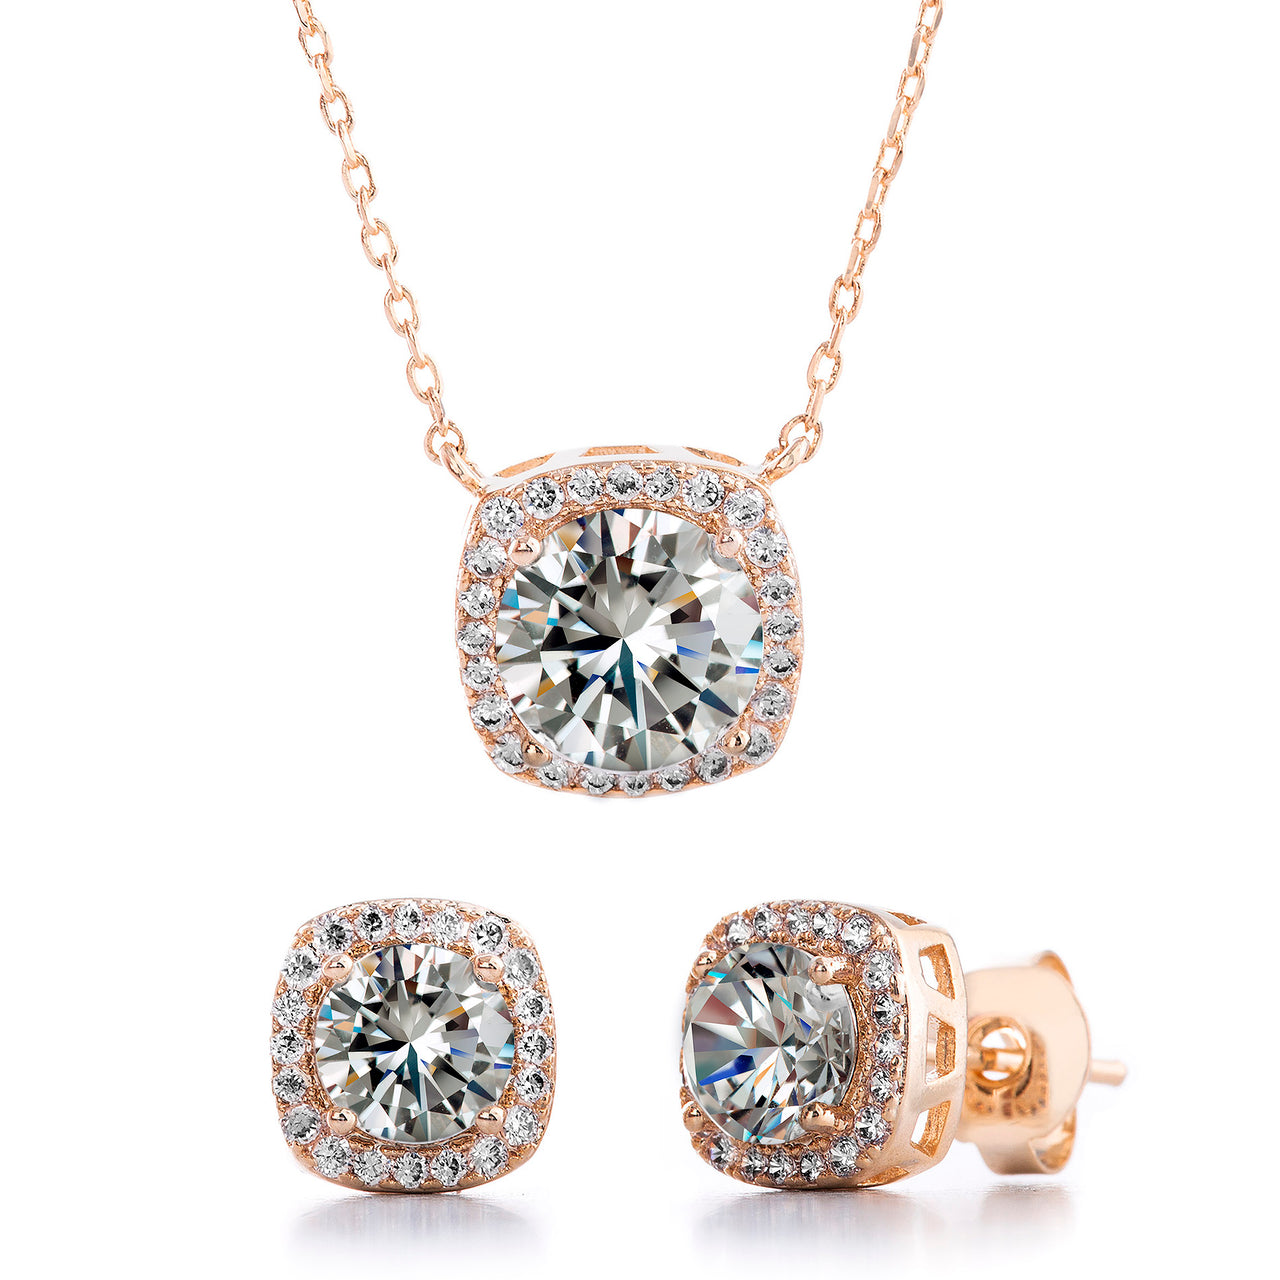 Lesa Michele Rose Gold Plated Sterling Silver Crystal Square Cut Necklace and Matching Stud Earring Set